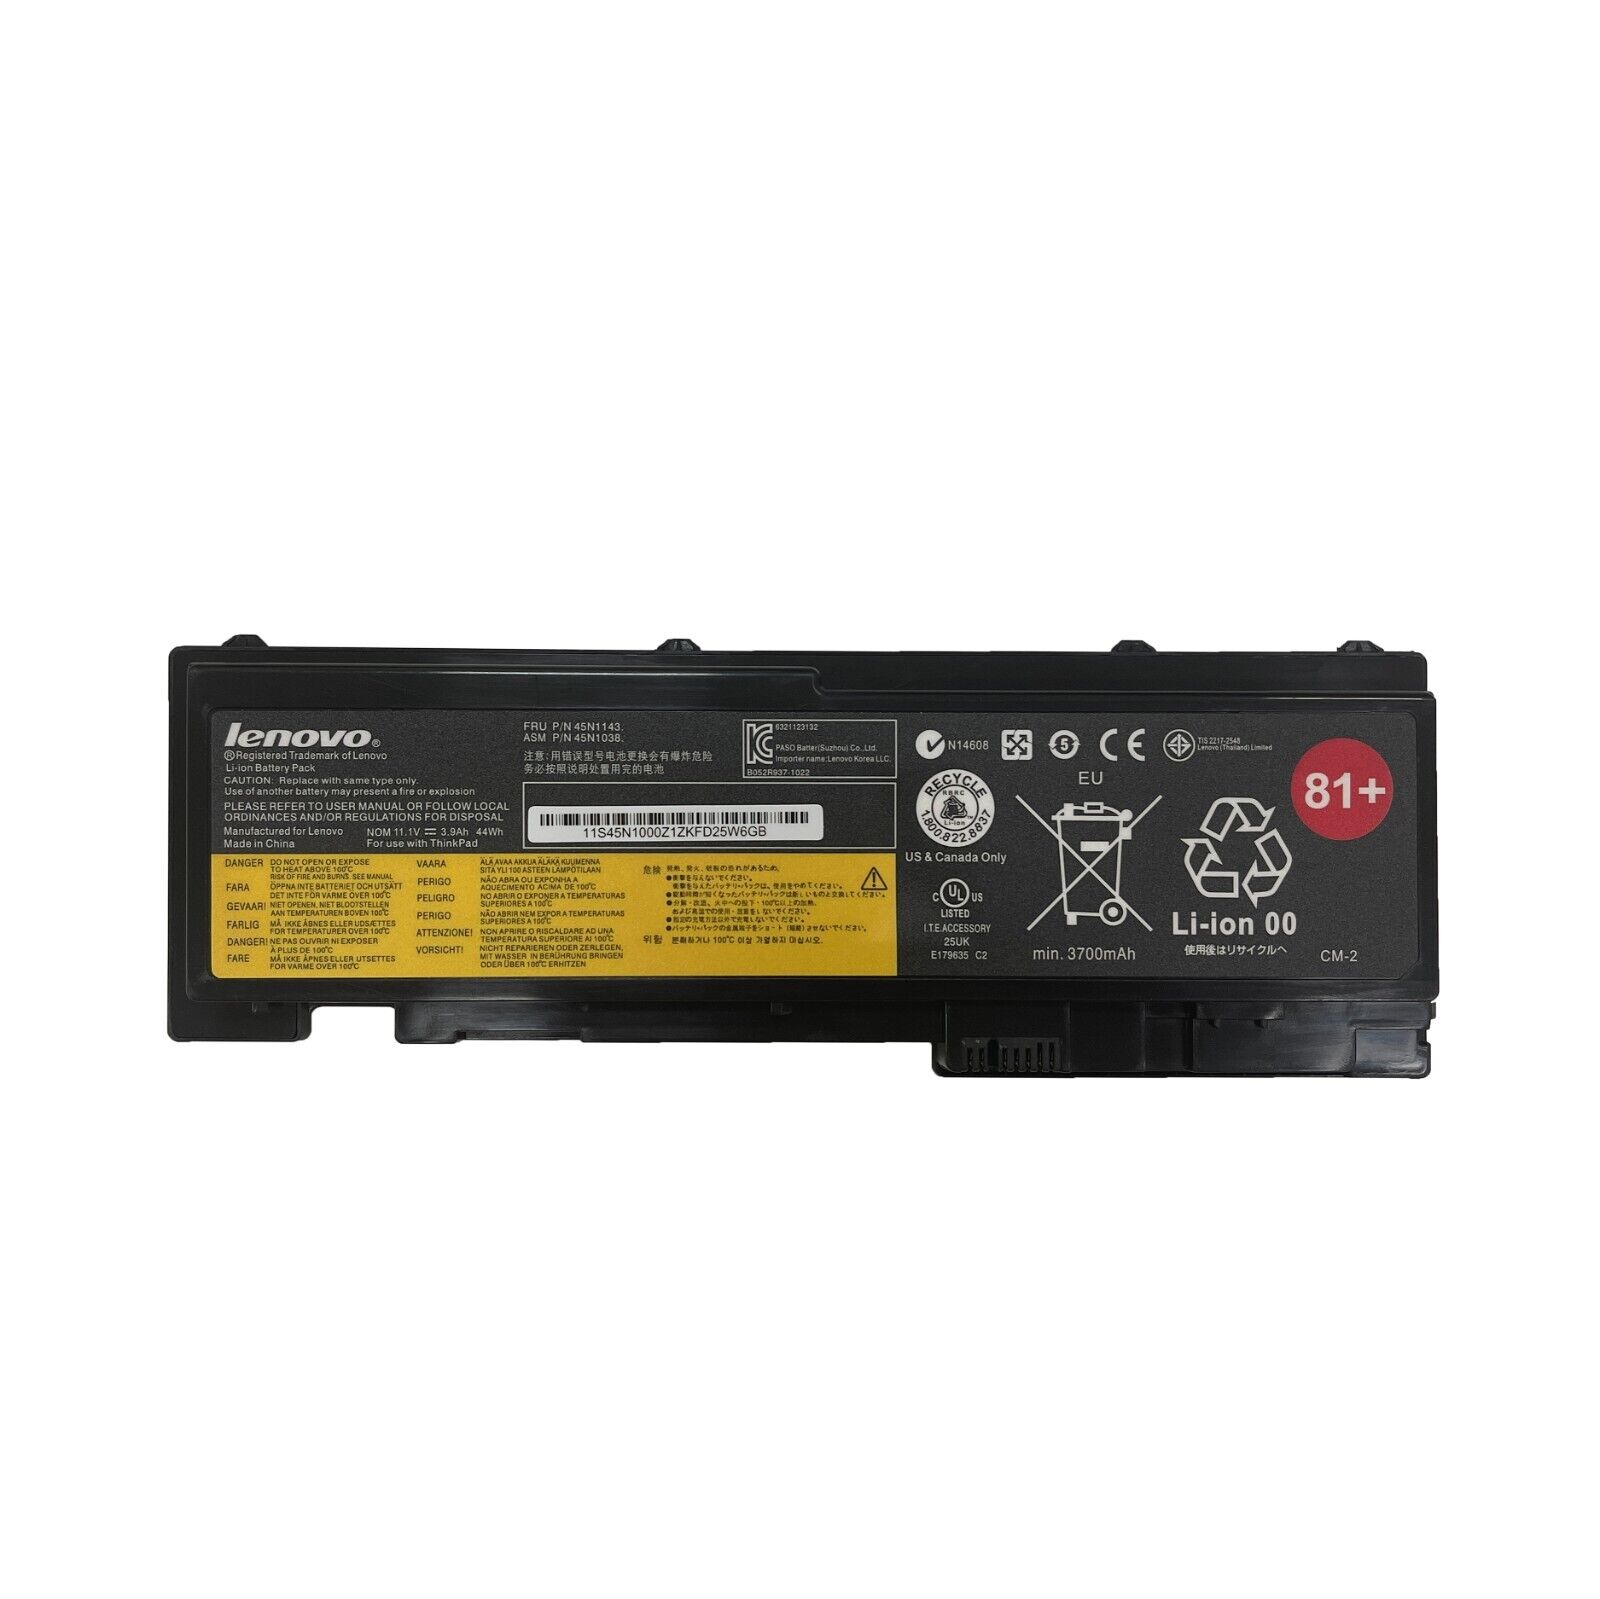 Genuine OEM T430S Battery for Lenovo ThinkPad T420S 0A36287 45N1036 45N1143 44Wh